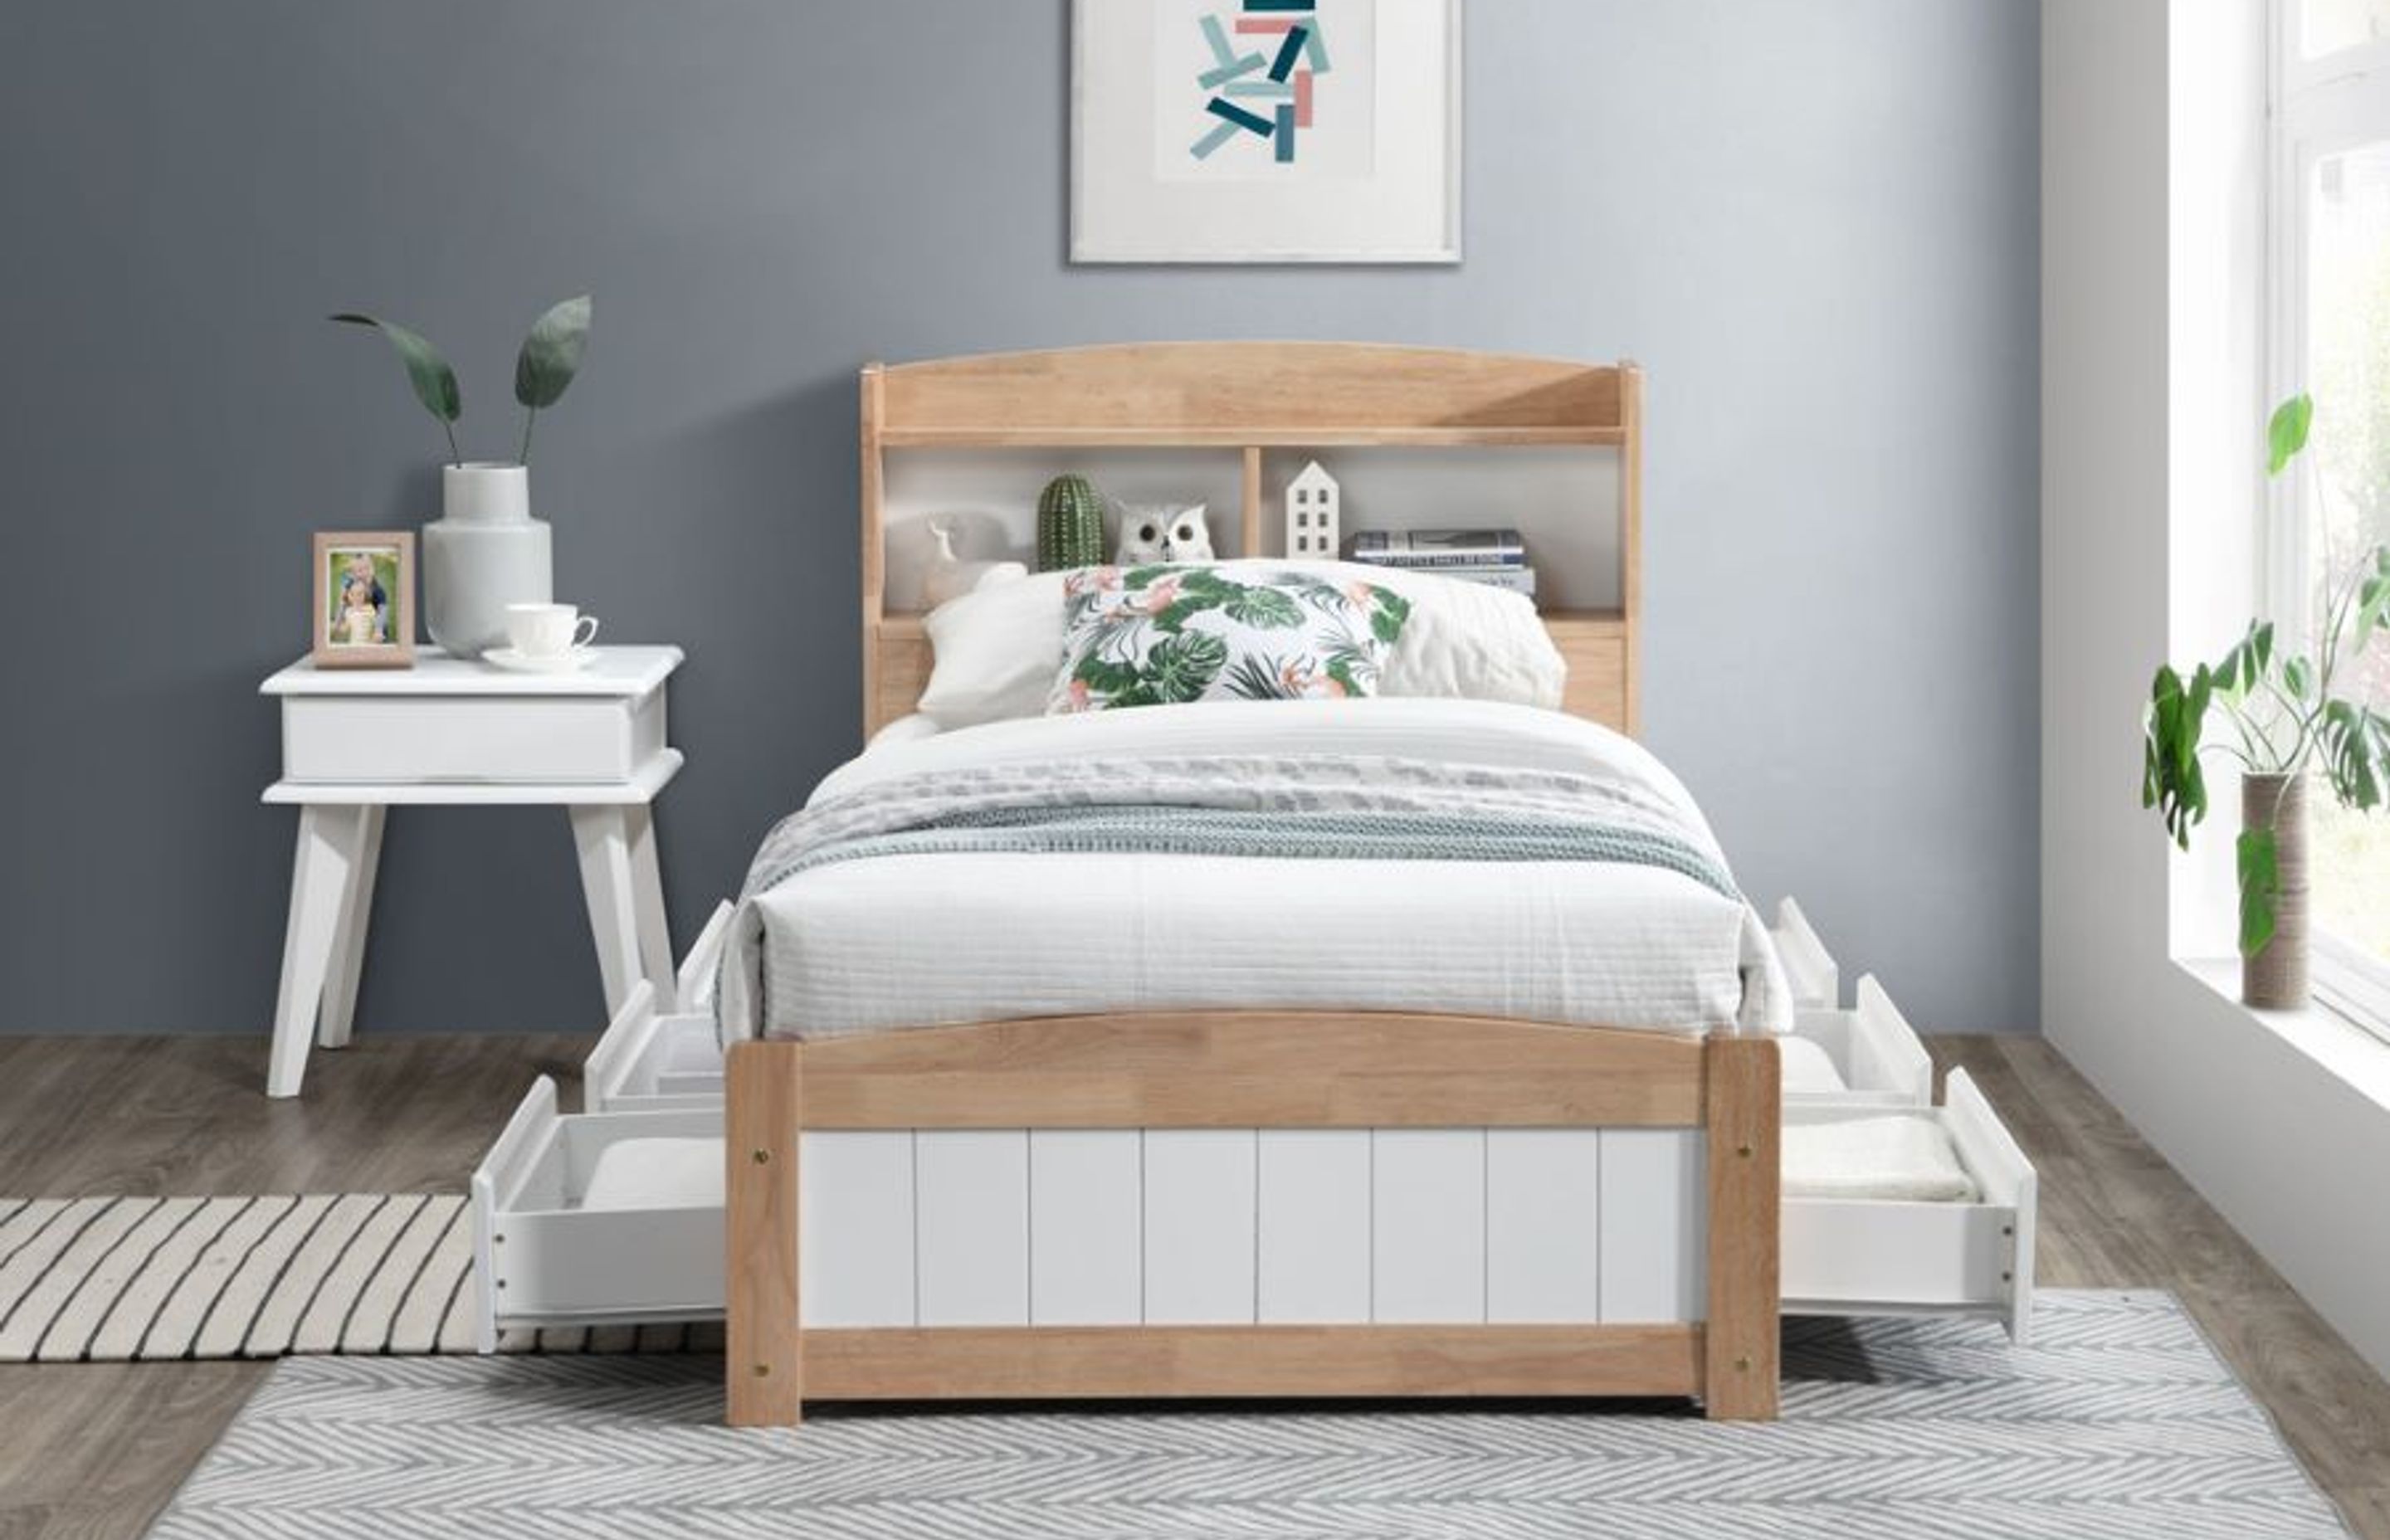 2021 Bed Frame Sizes &amp; Mattress Dimensions in Australia